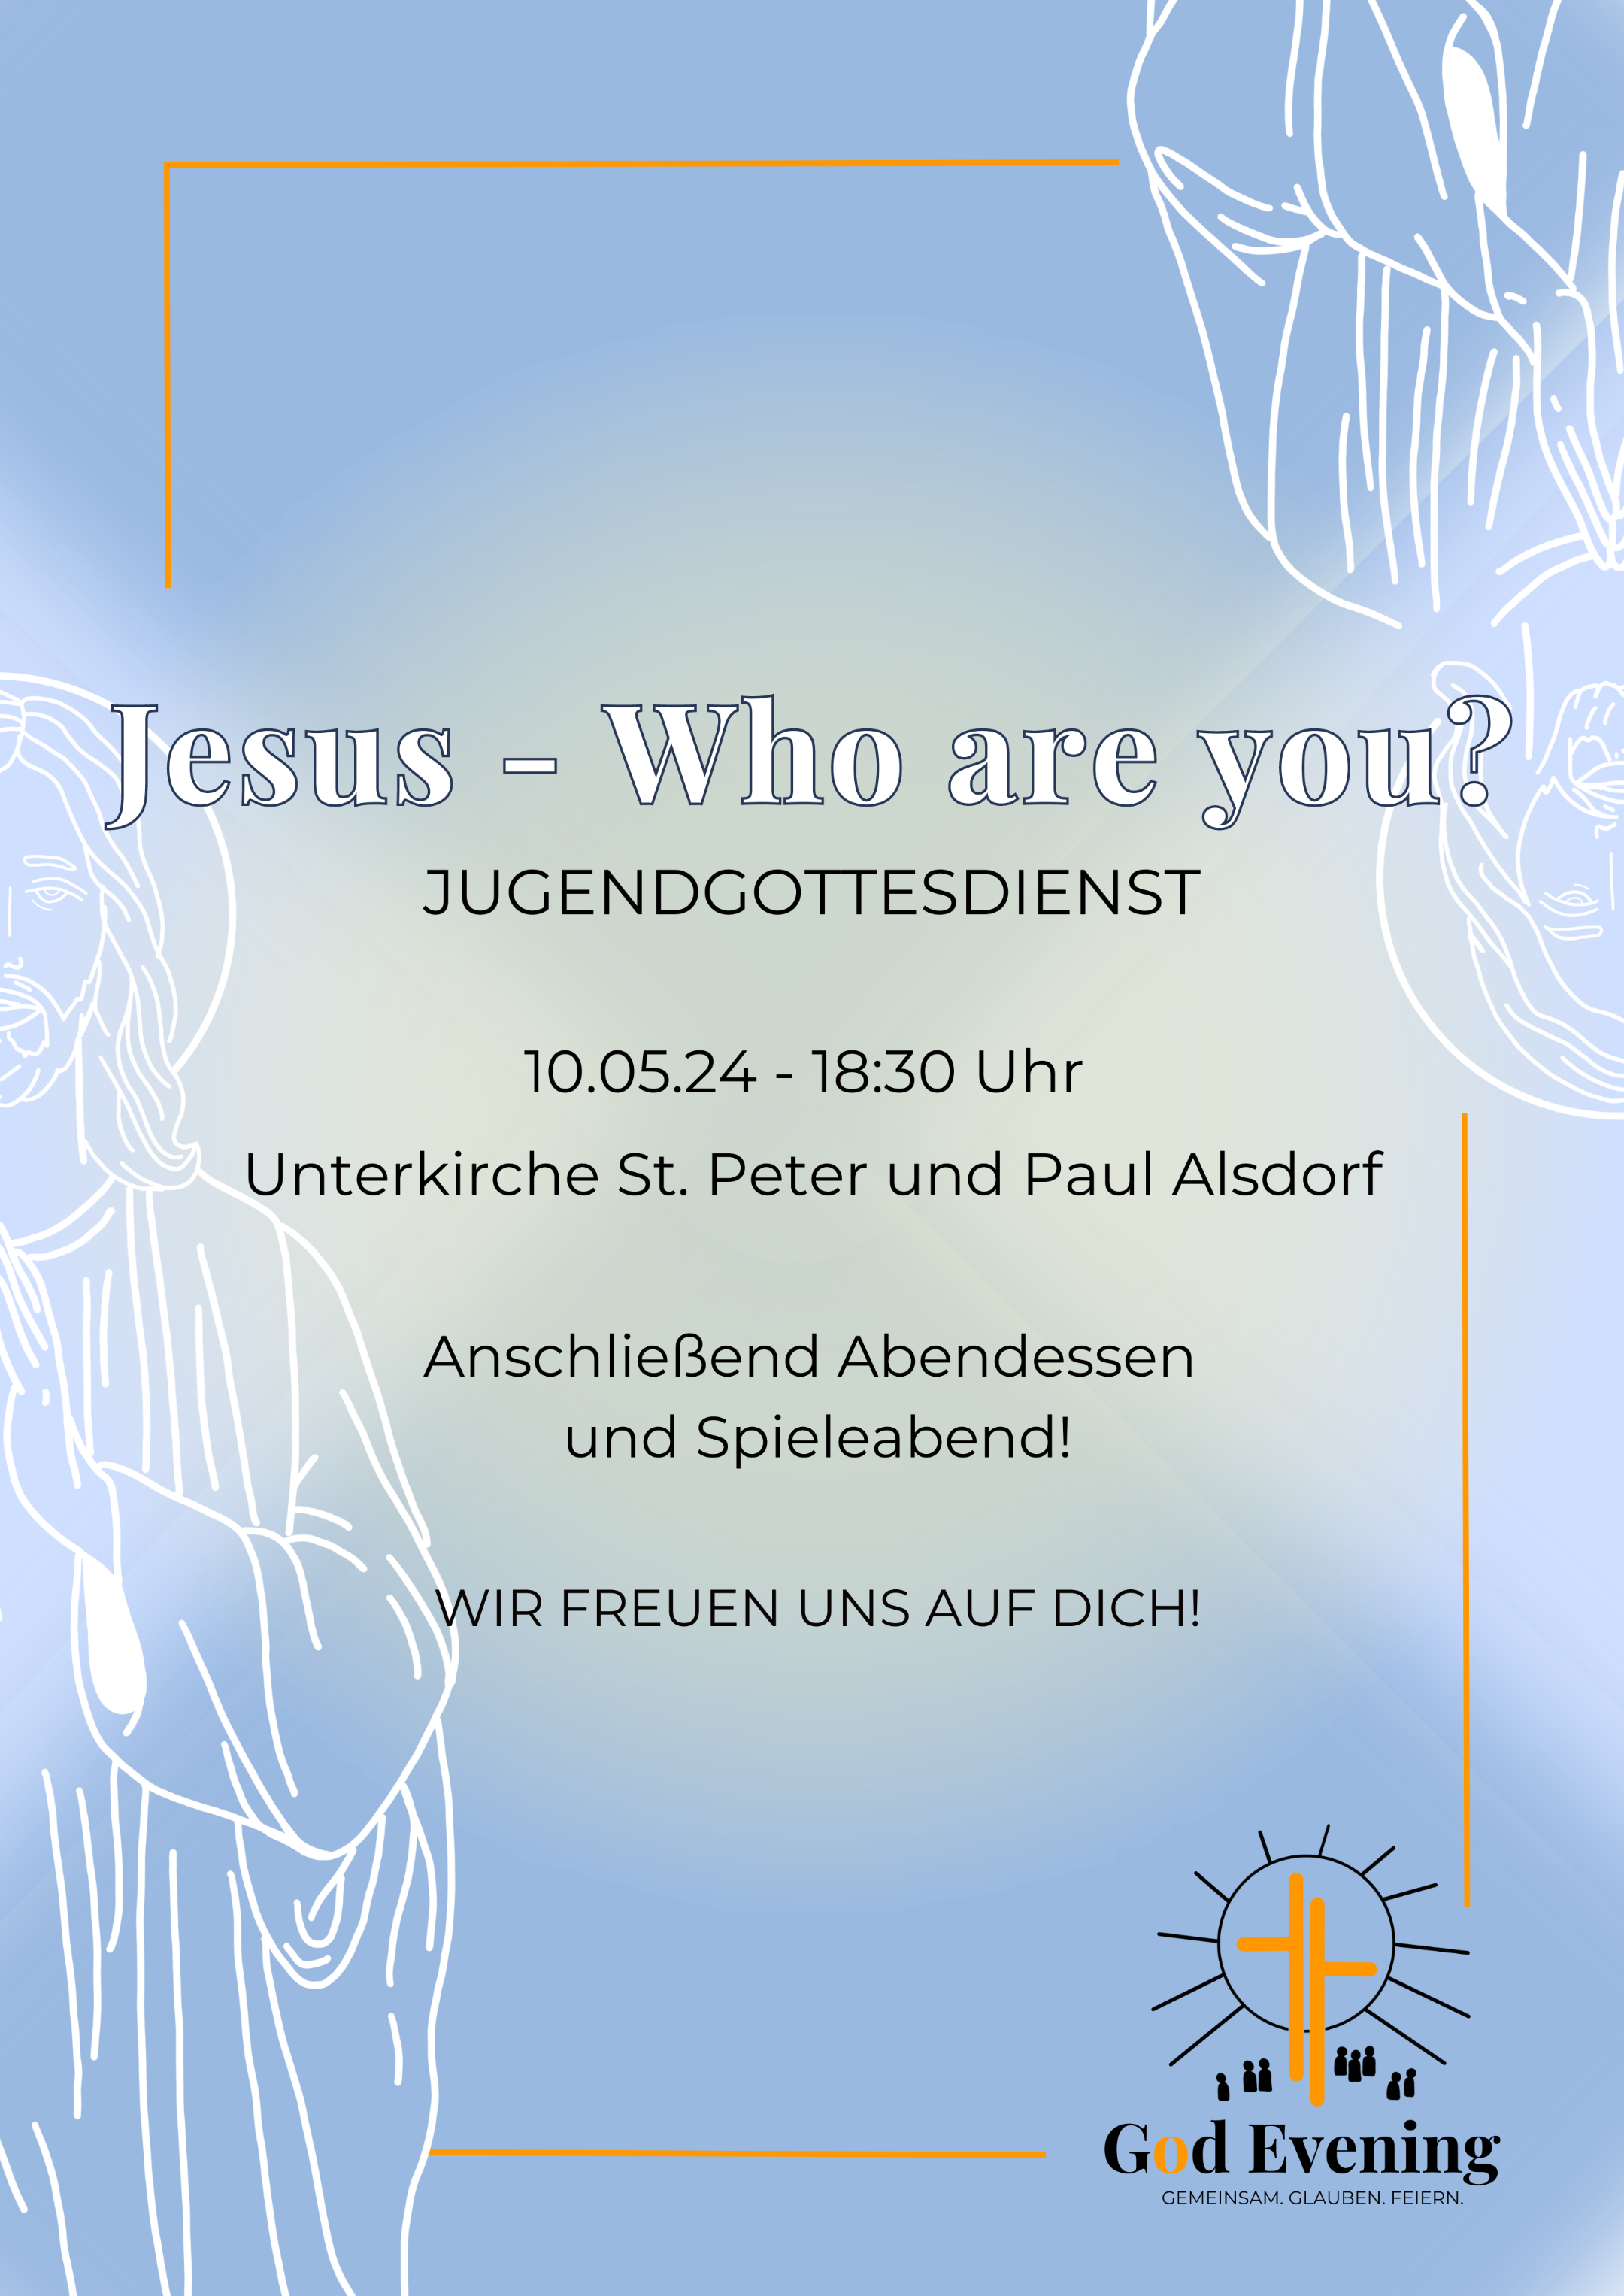 Jesus - Who are you?